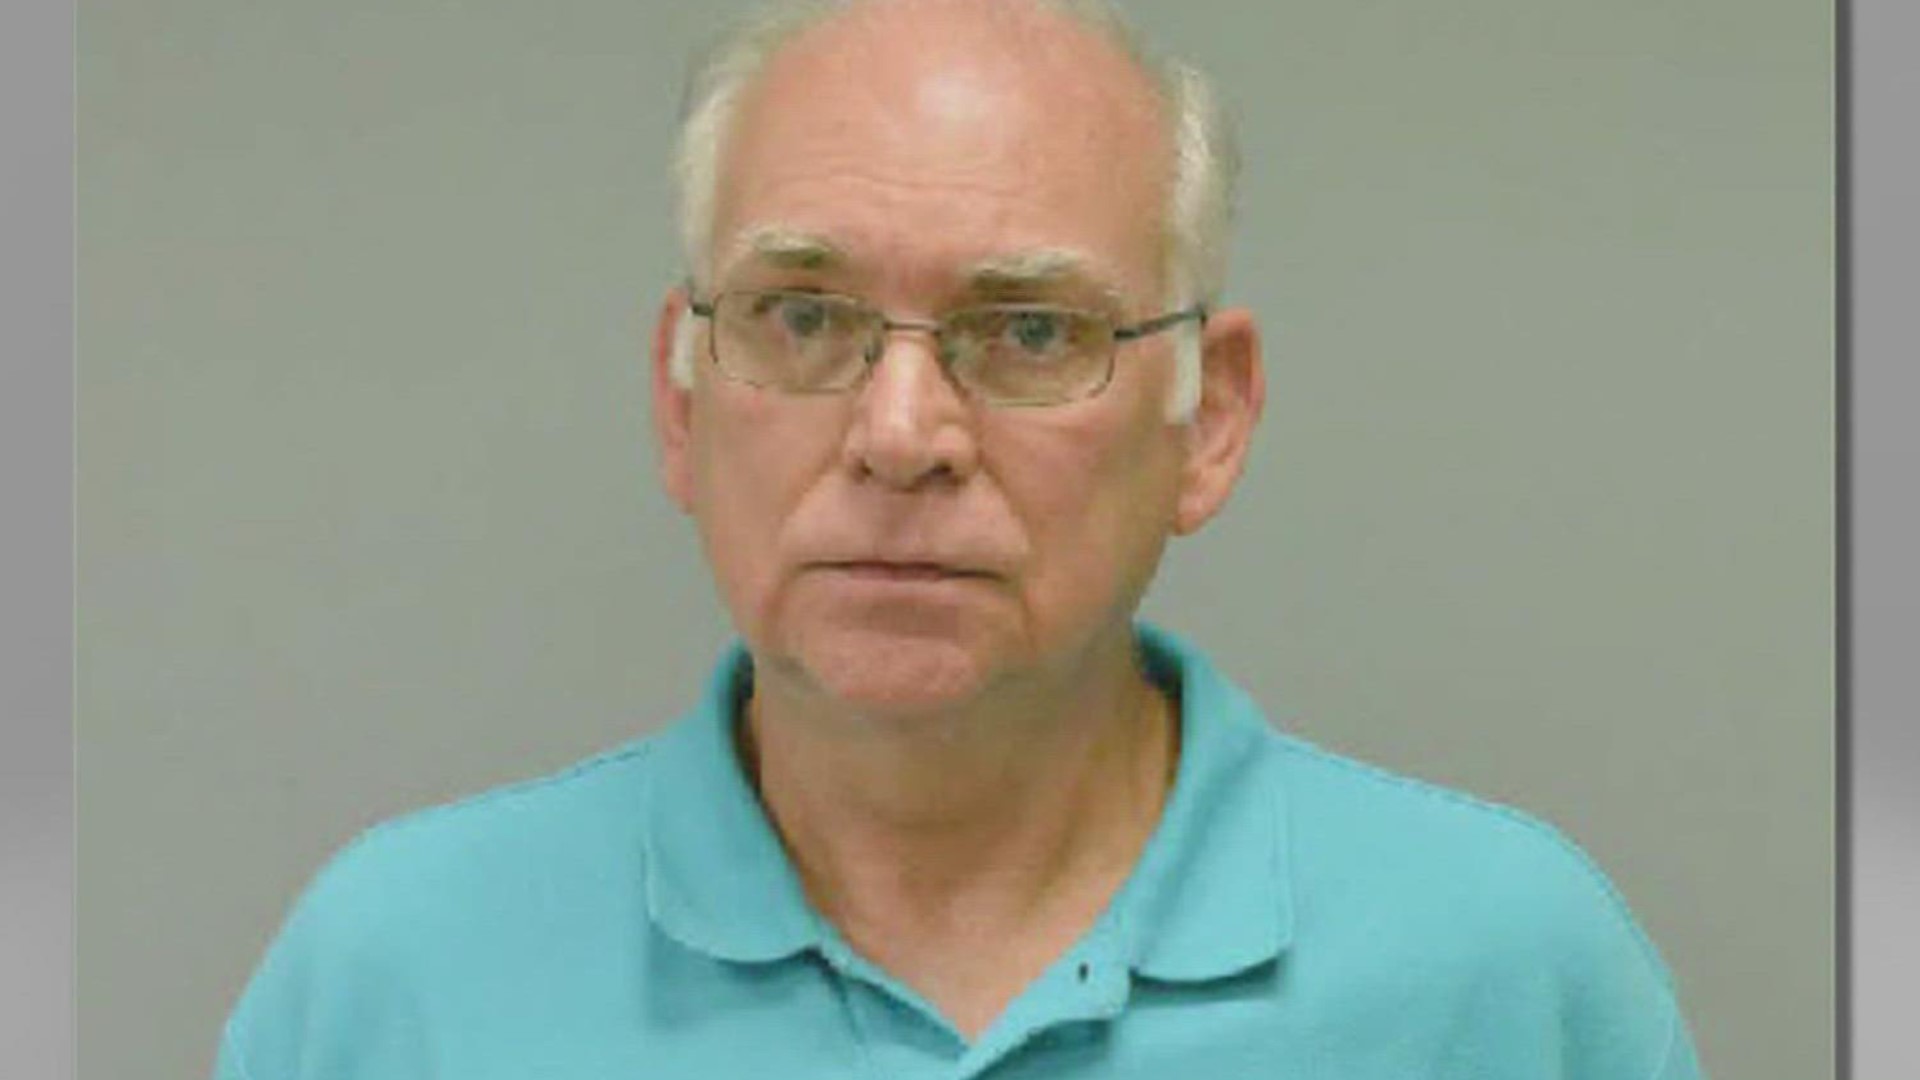 Harry Almond was sentenced to six years in prison for inappropriately touching students at his home in Bella Vista.